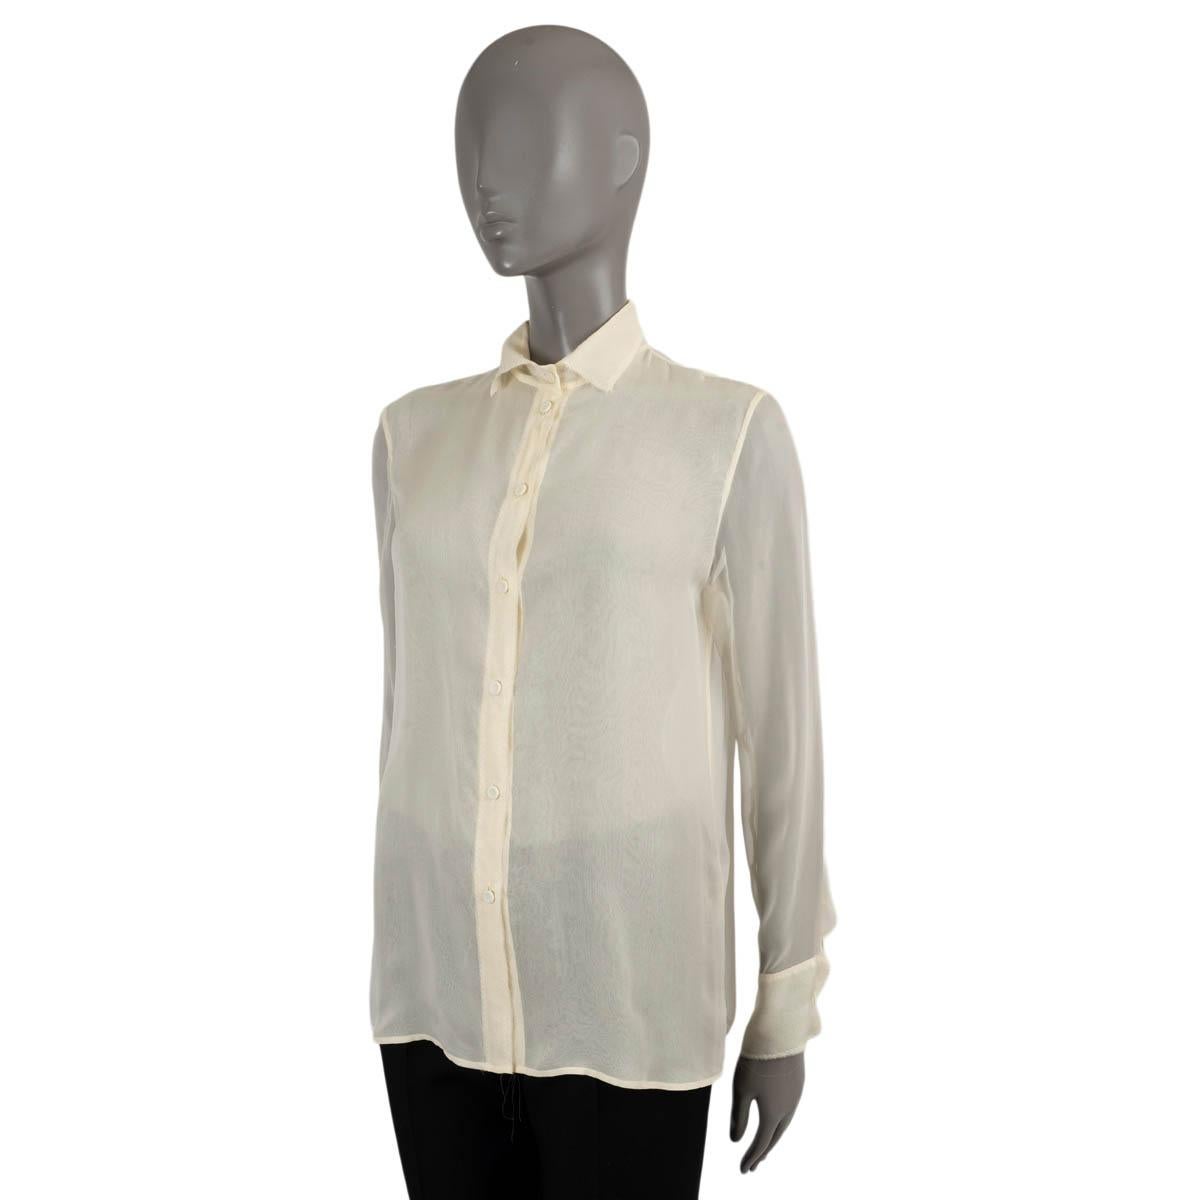 100% authentic Bottega Veneta sheer blouse in cream silk (100%). Features zigzag stitching along the edges with open, frayed hems. Closes with fabric covered buttons on the front. Has been worn and is in excellent condition.